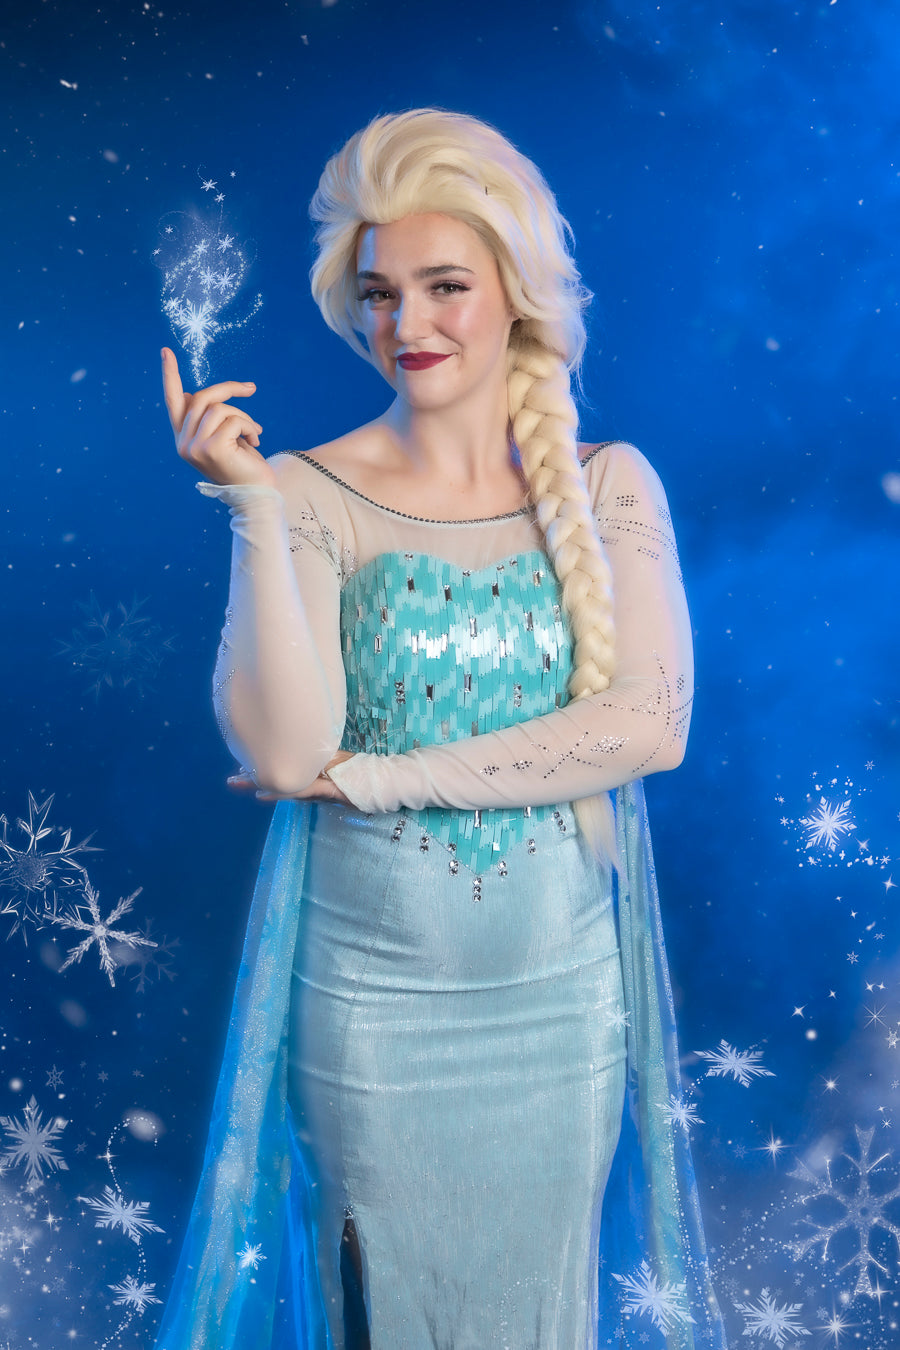 Elsa inspired by the Disney classic Frozen Costume Hire or Cosplay, plus Makeup and Photography. Proudly by and available at, Little Shop of Horrors Costumery 6/1 Watt Rd Mornington & Melbourne